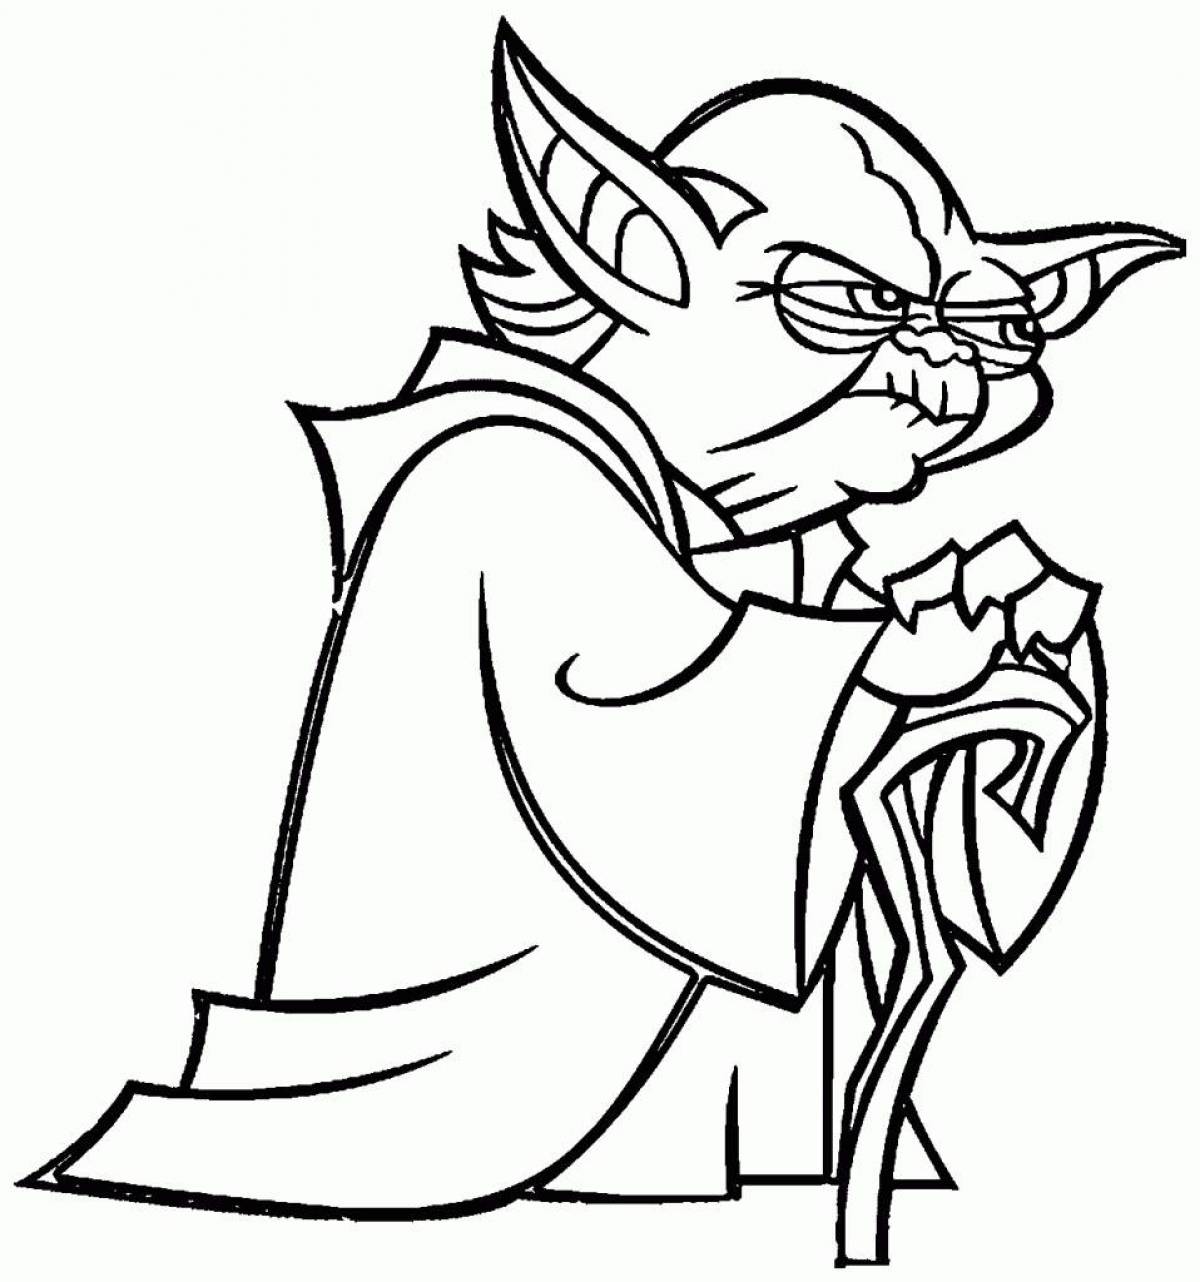 Yoda's playful coloring page